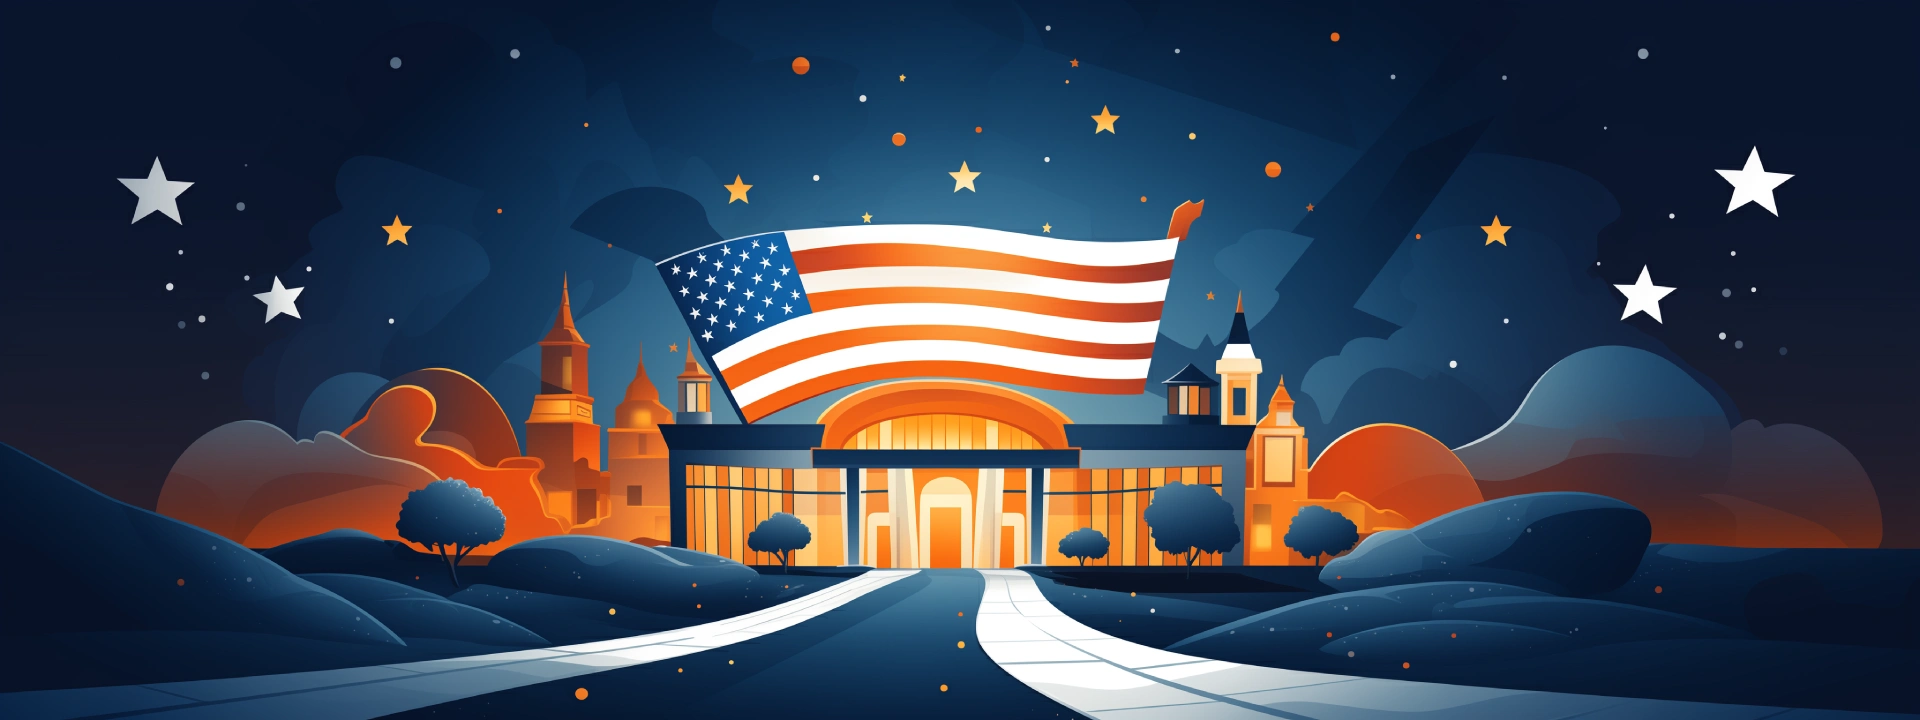 Casino with american flag over it cartoon drawn